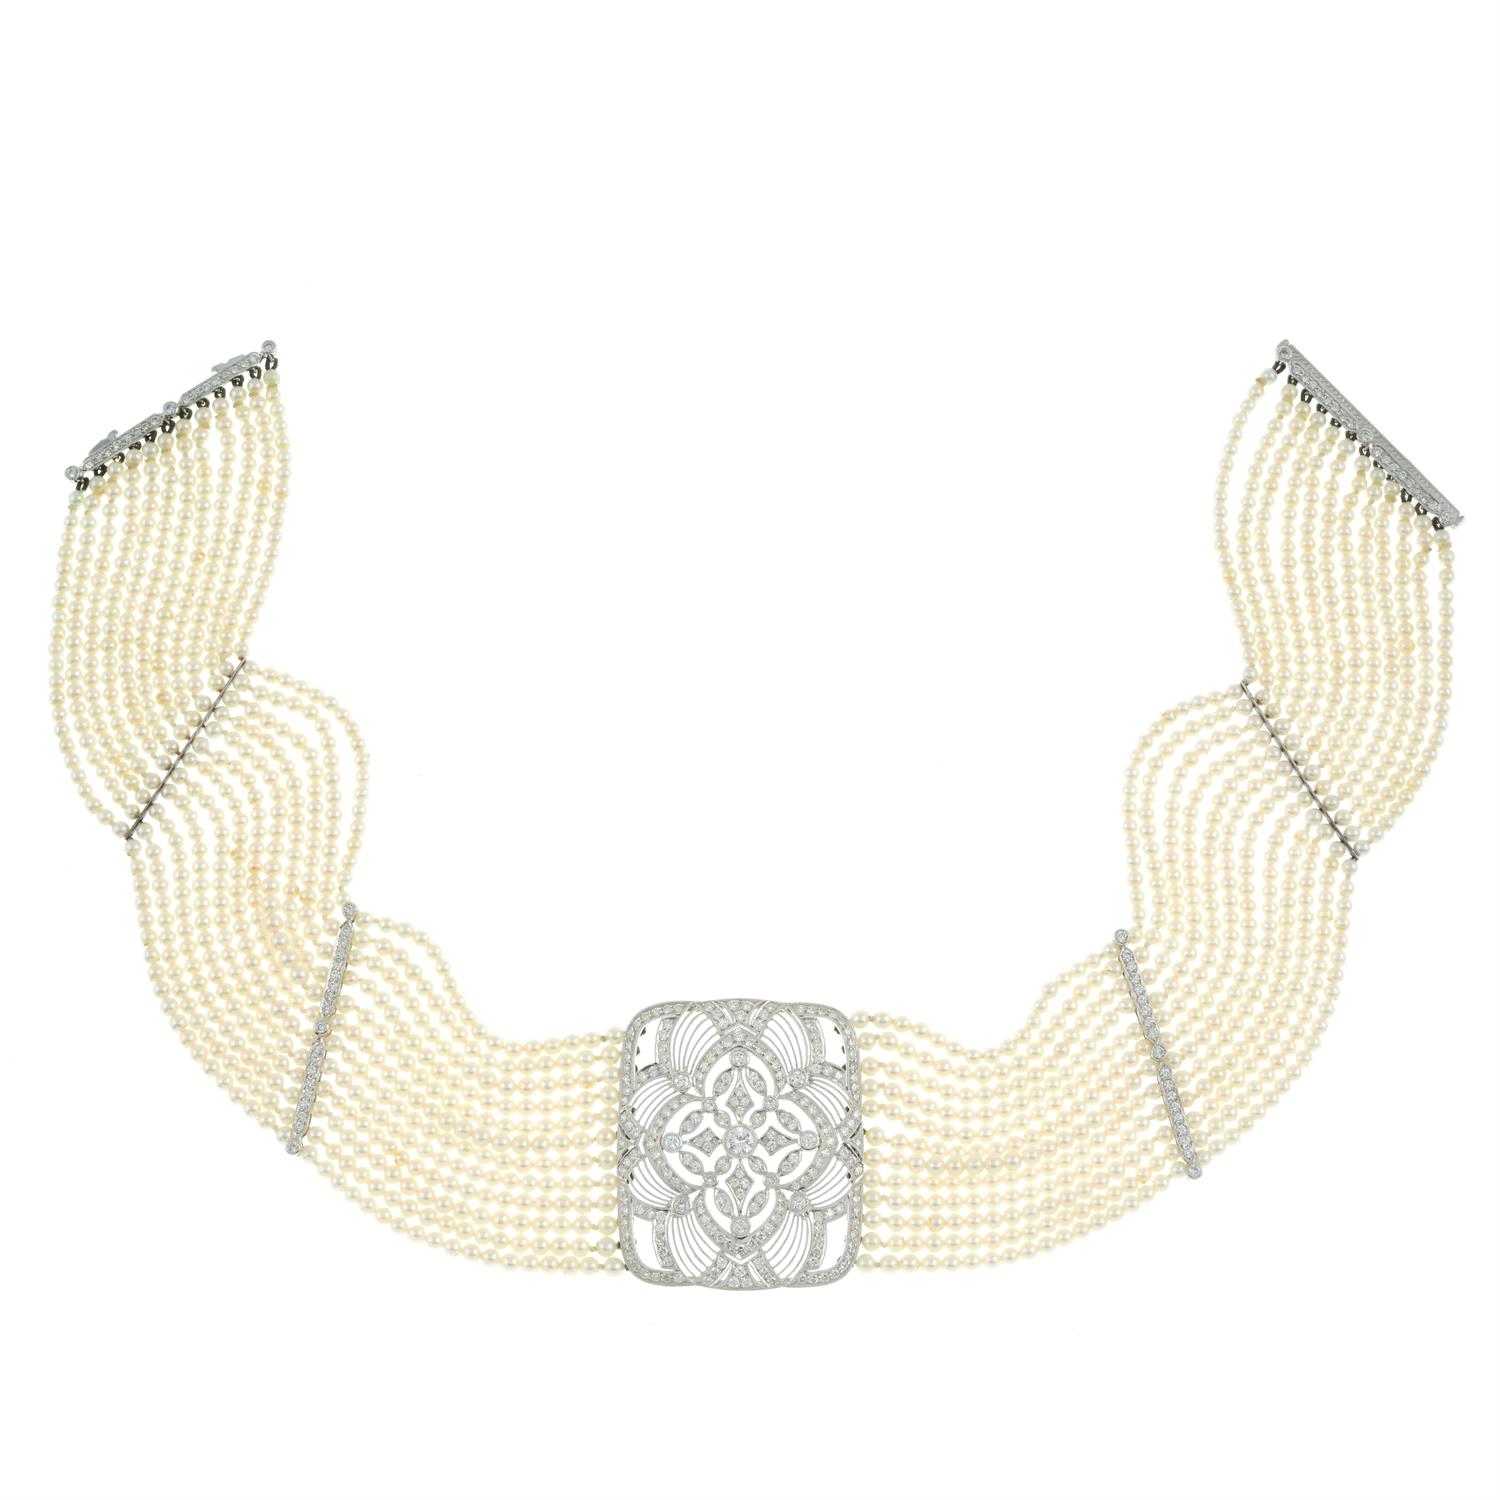 Seed pearl and diamond choker necklace, by Adler - Image 5 of 6